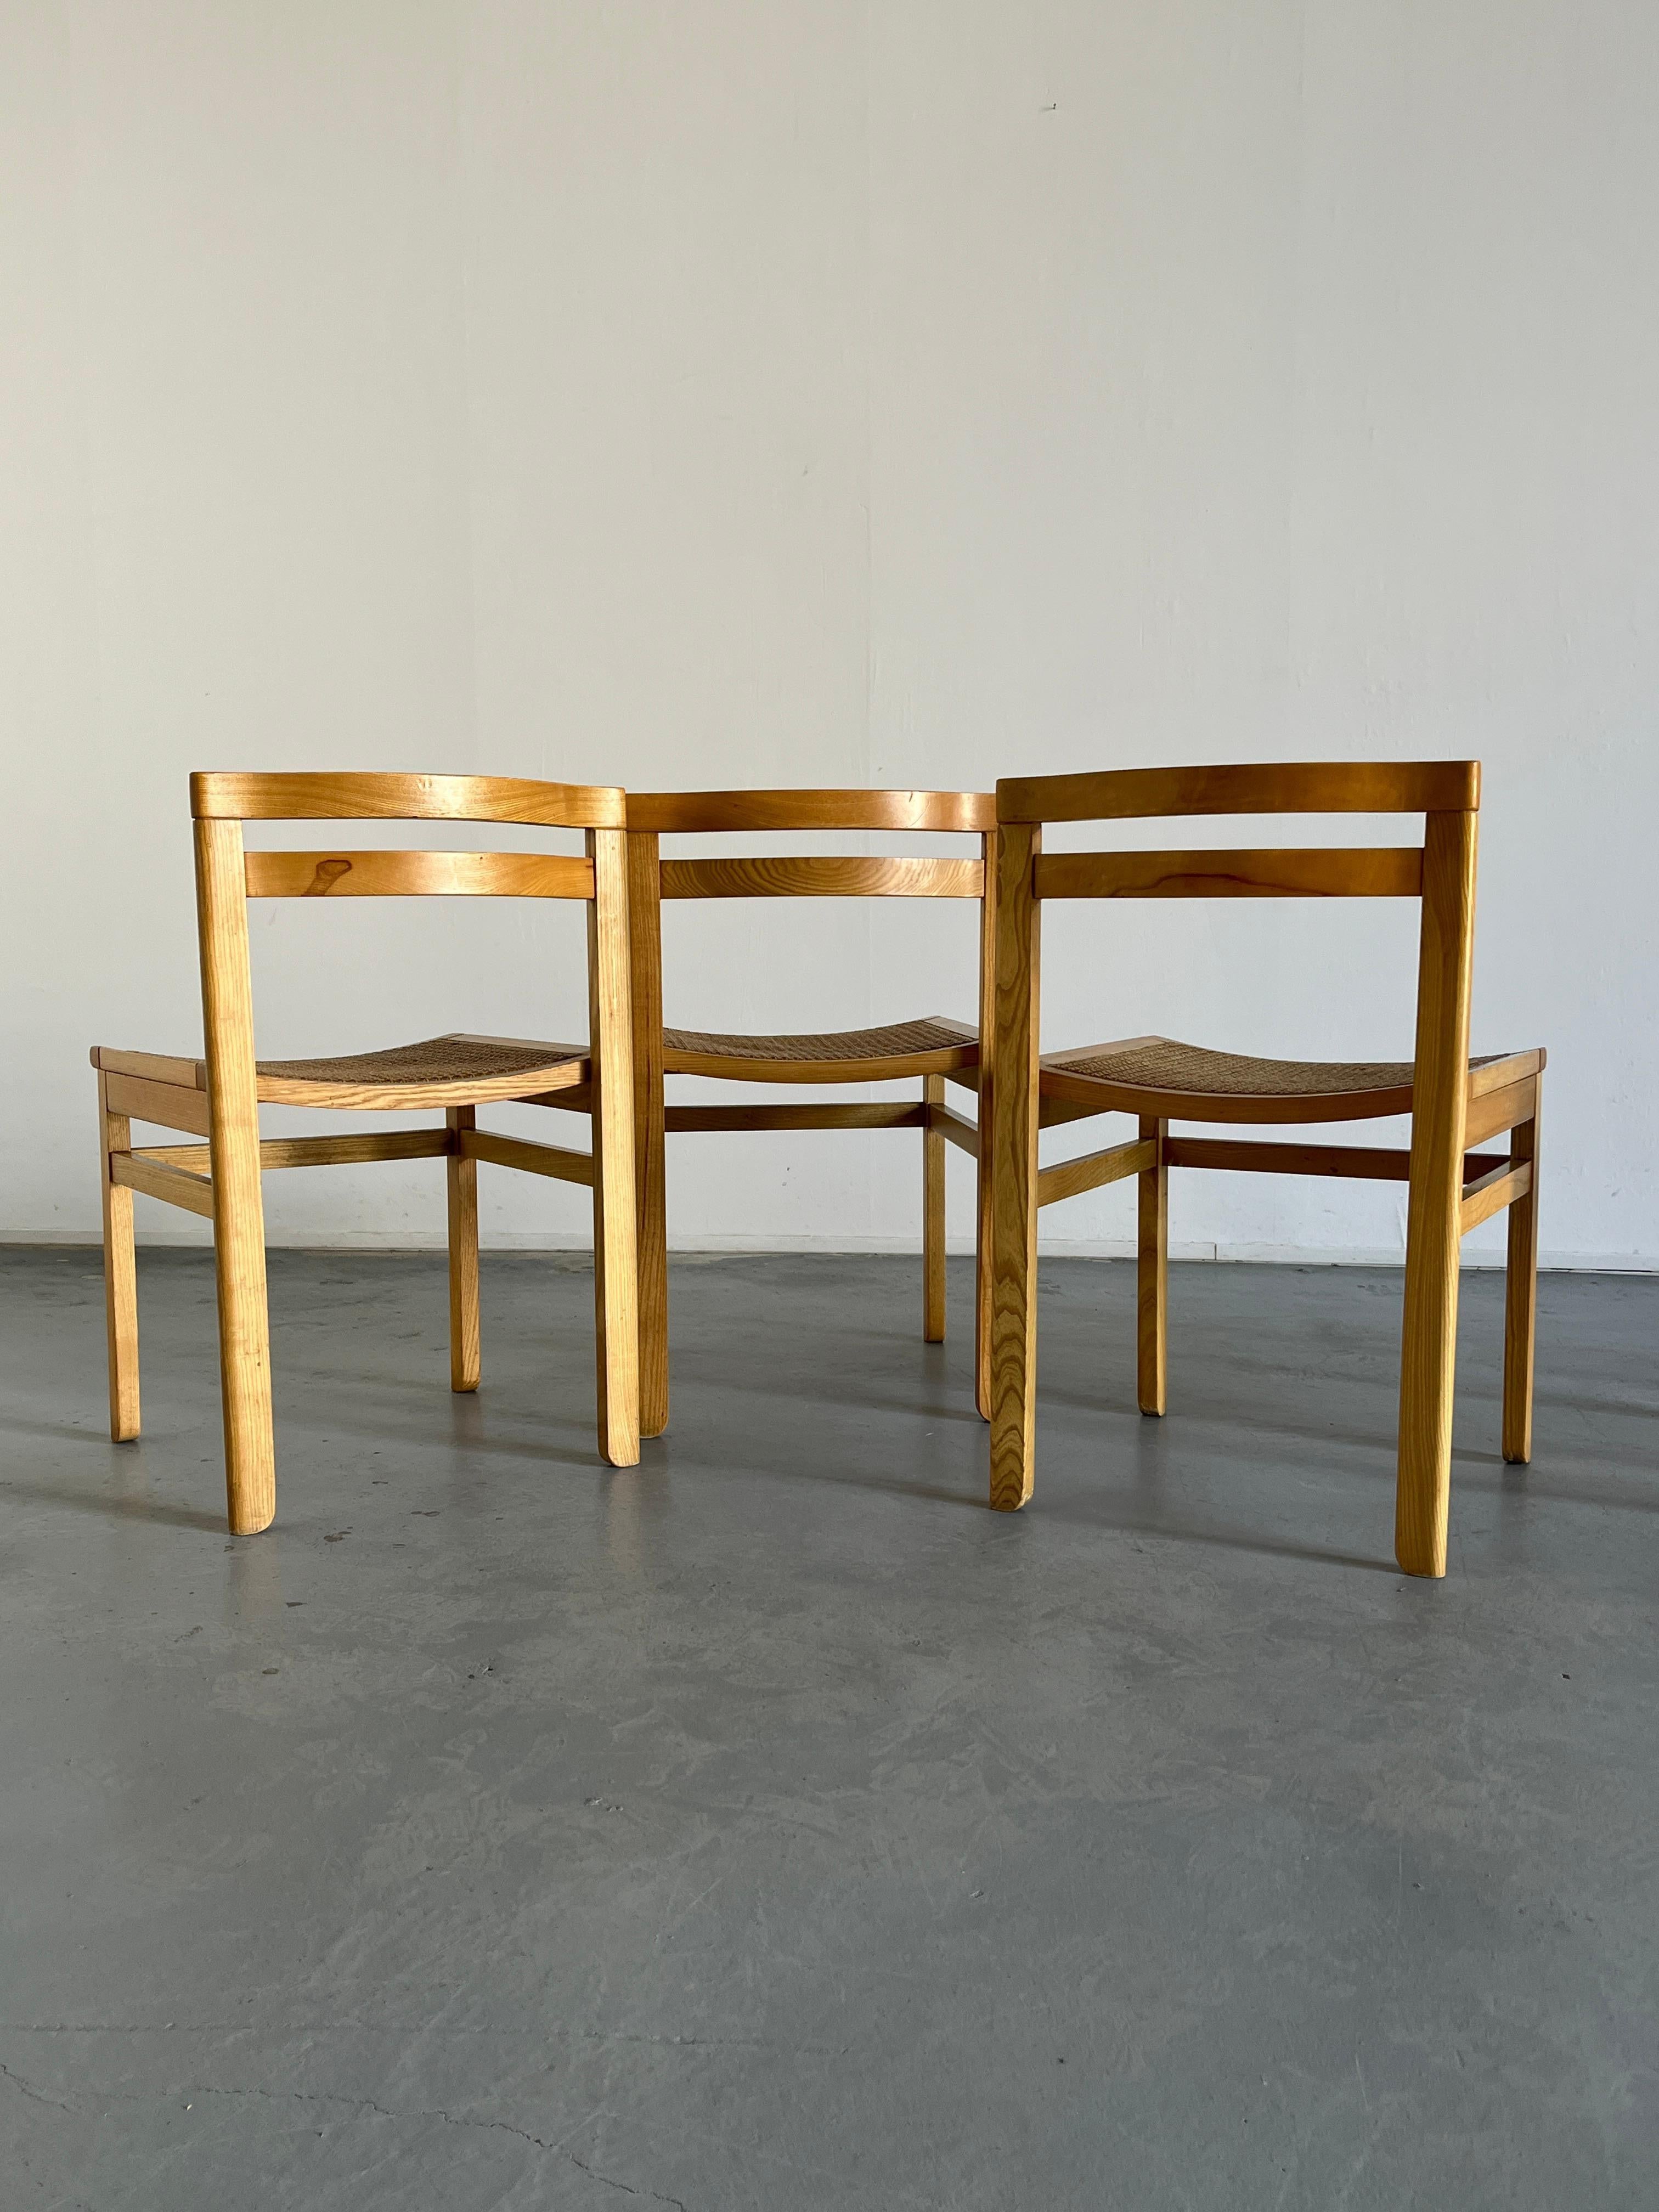 Set of 4 Mid-Century Modern Constructivist Wooden Dining Chairs in Beech, 1960s For Sale 2